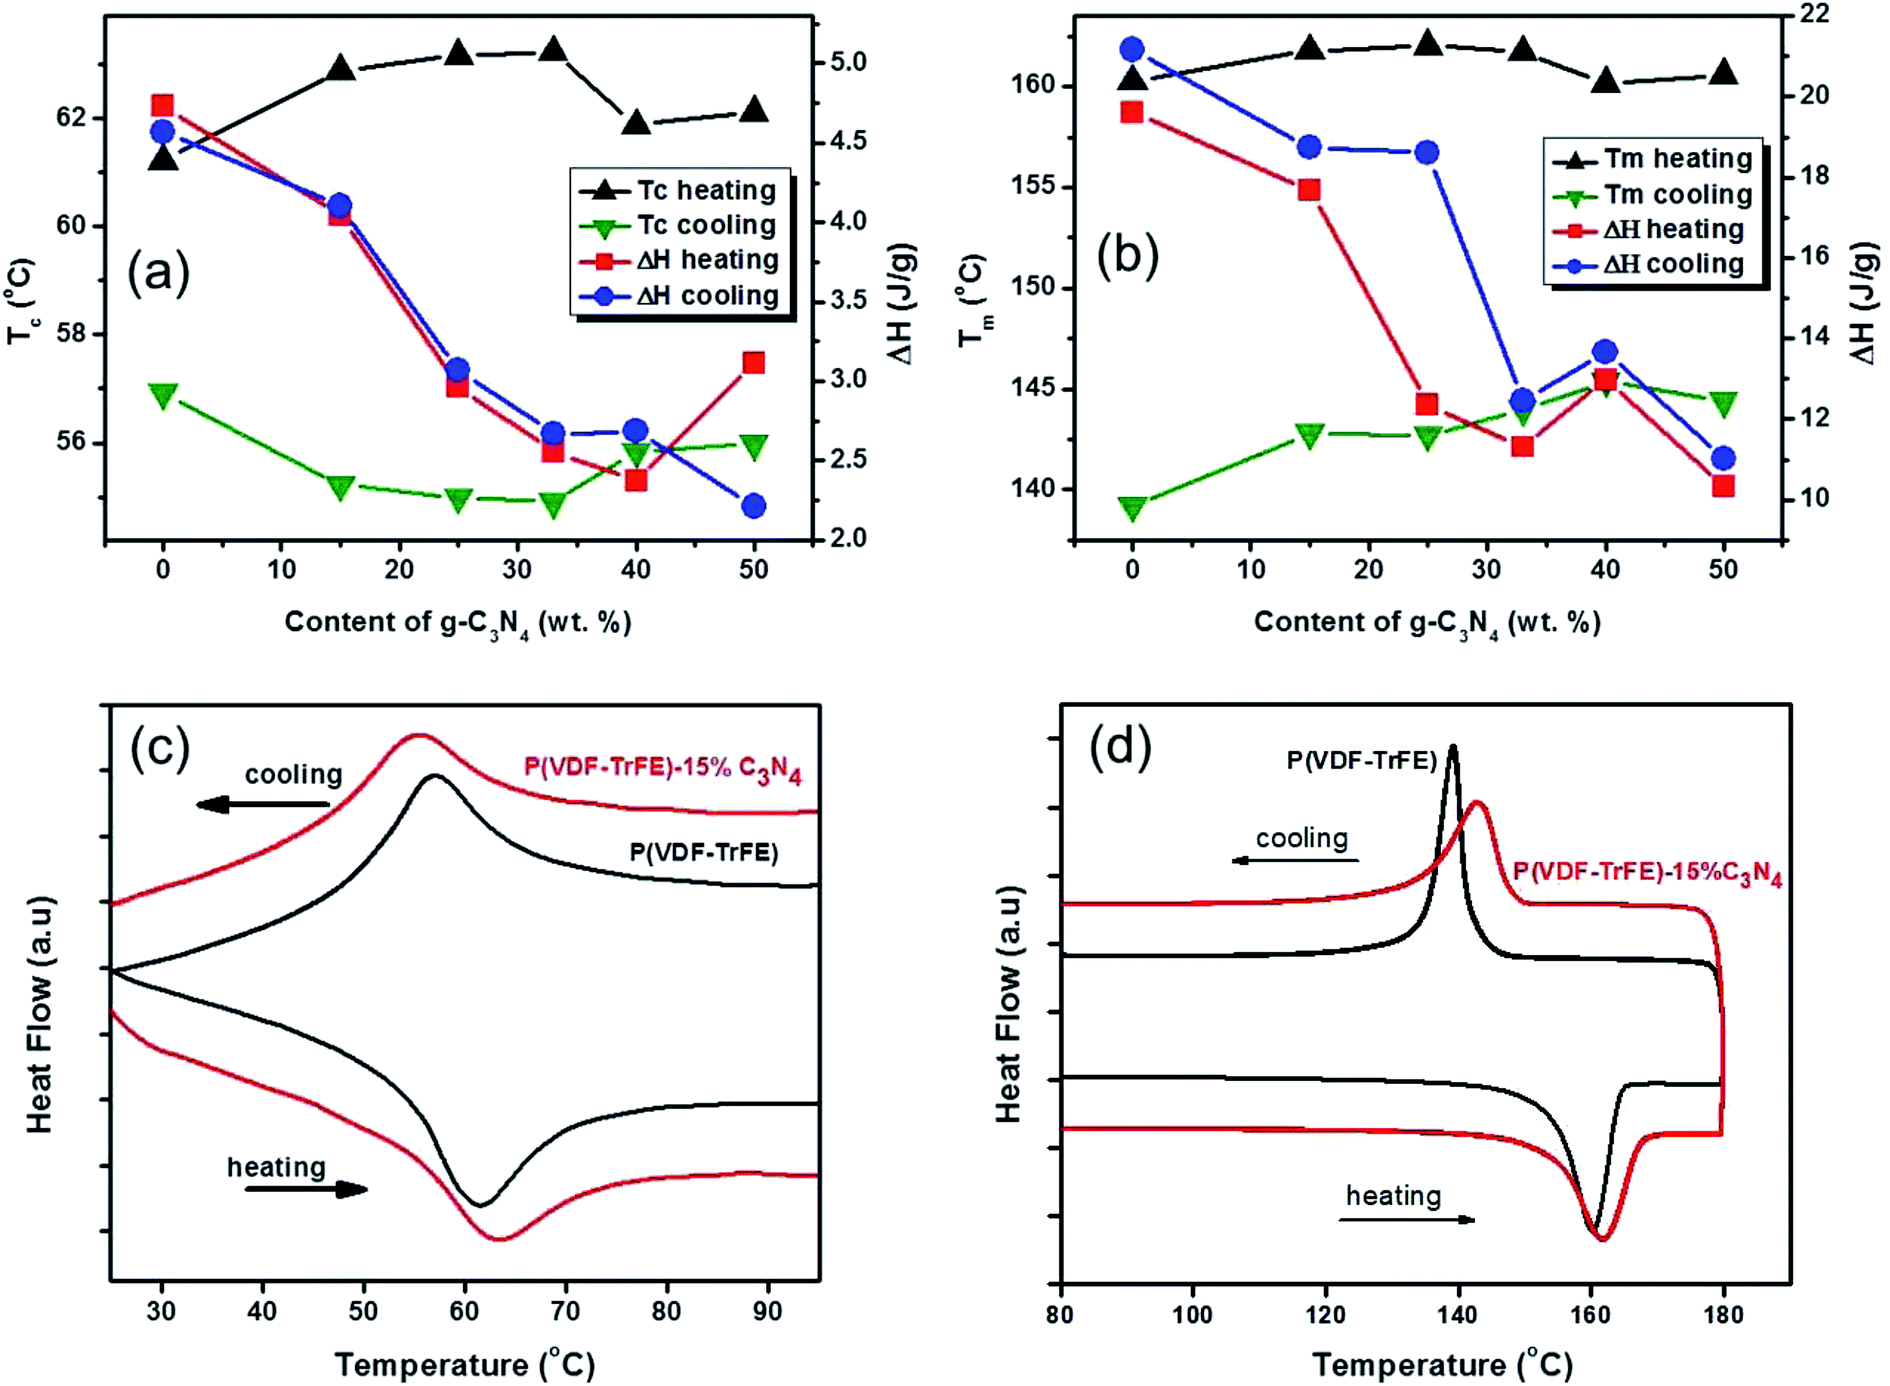 The Effects Of Additions Of Two Dimensional Graphitic C 3 N 4 On The Negative Electro Caloric Effects In P Vdf Trfe Copolymers Rsc Advances Rsc Publishing Doi 10 1039 C9raj